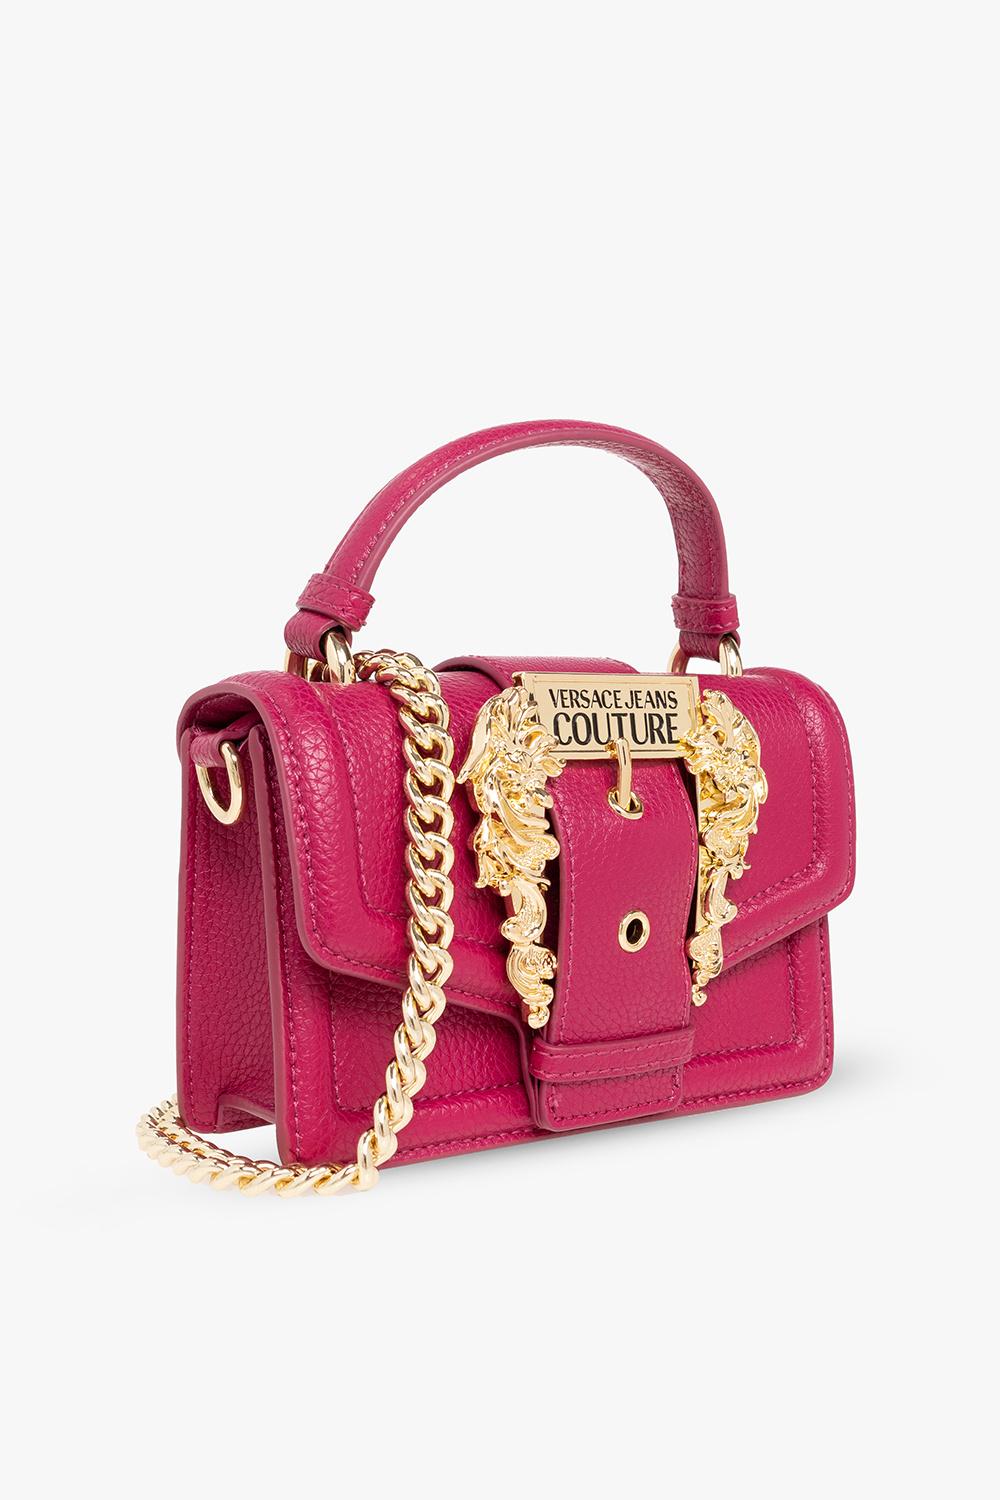 Versace Jeans Couture Shoulder Bag With Decorative Buckle in Pink | Lyst